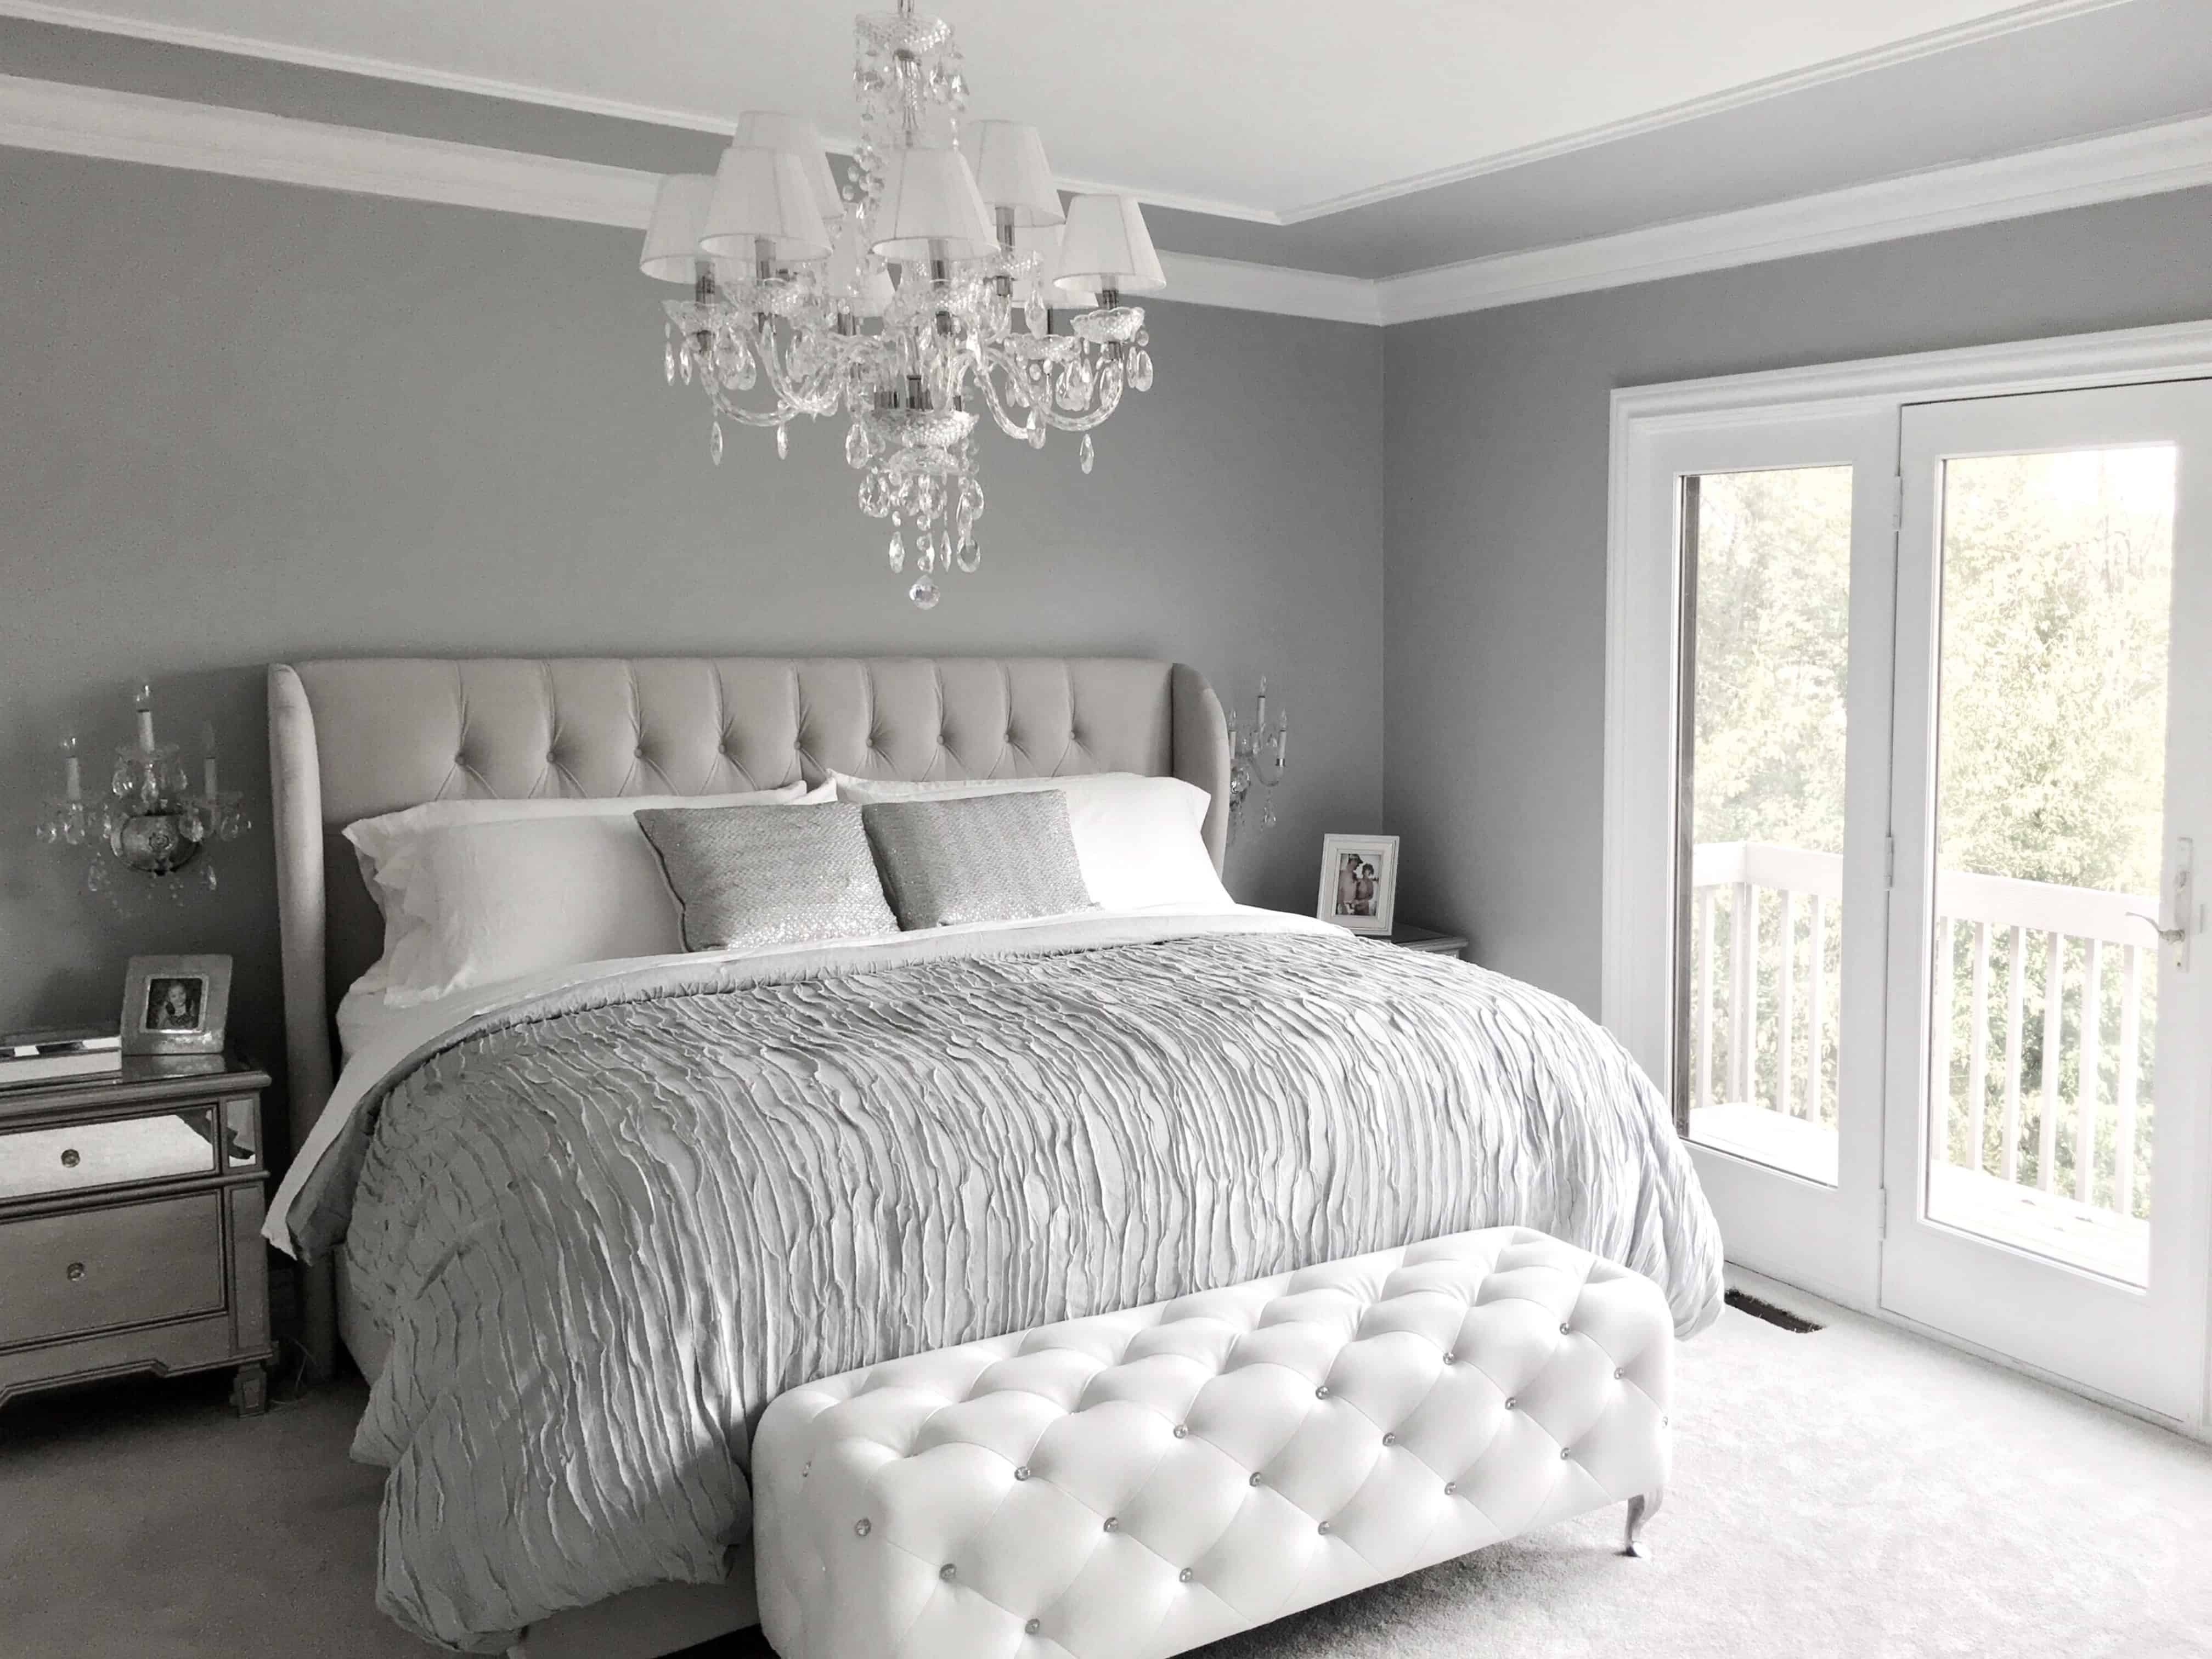 There is an elegance that comes with a tufted headboard.